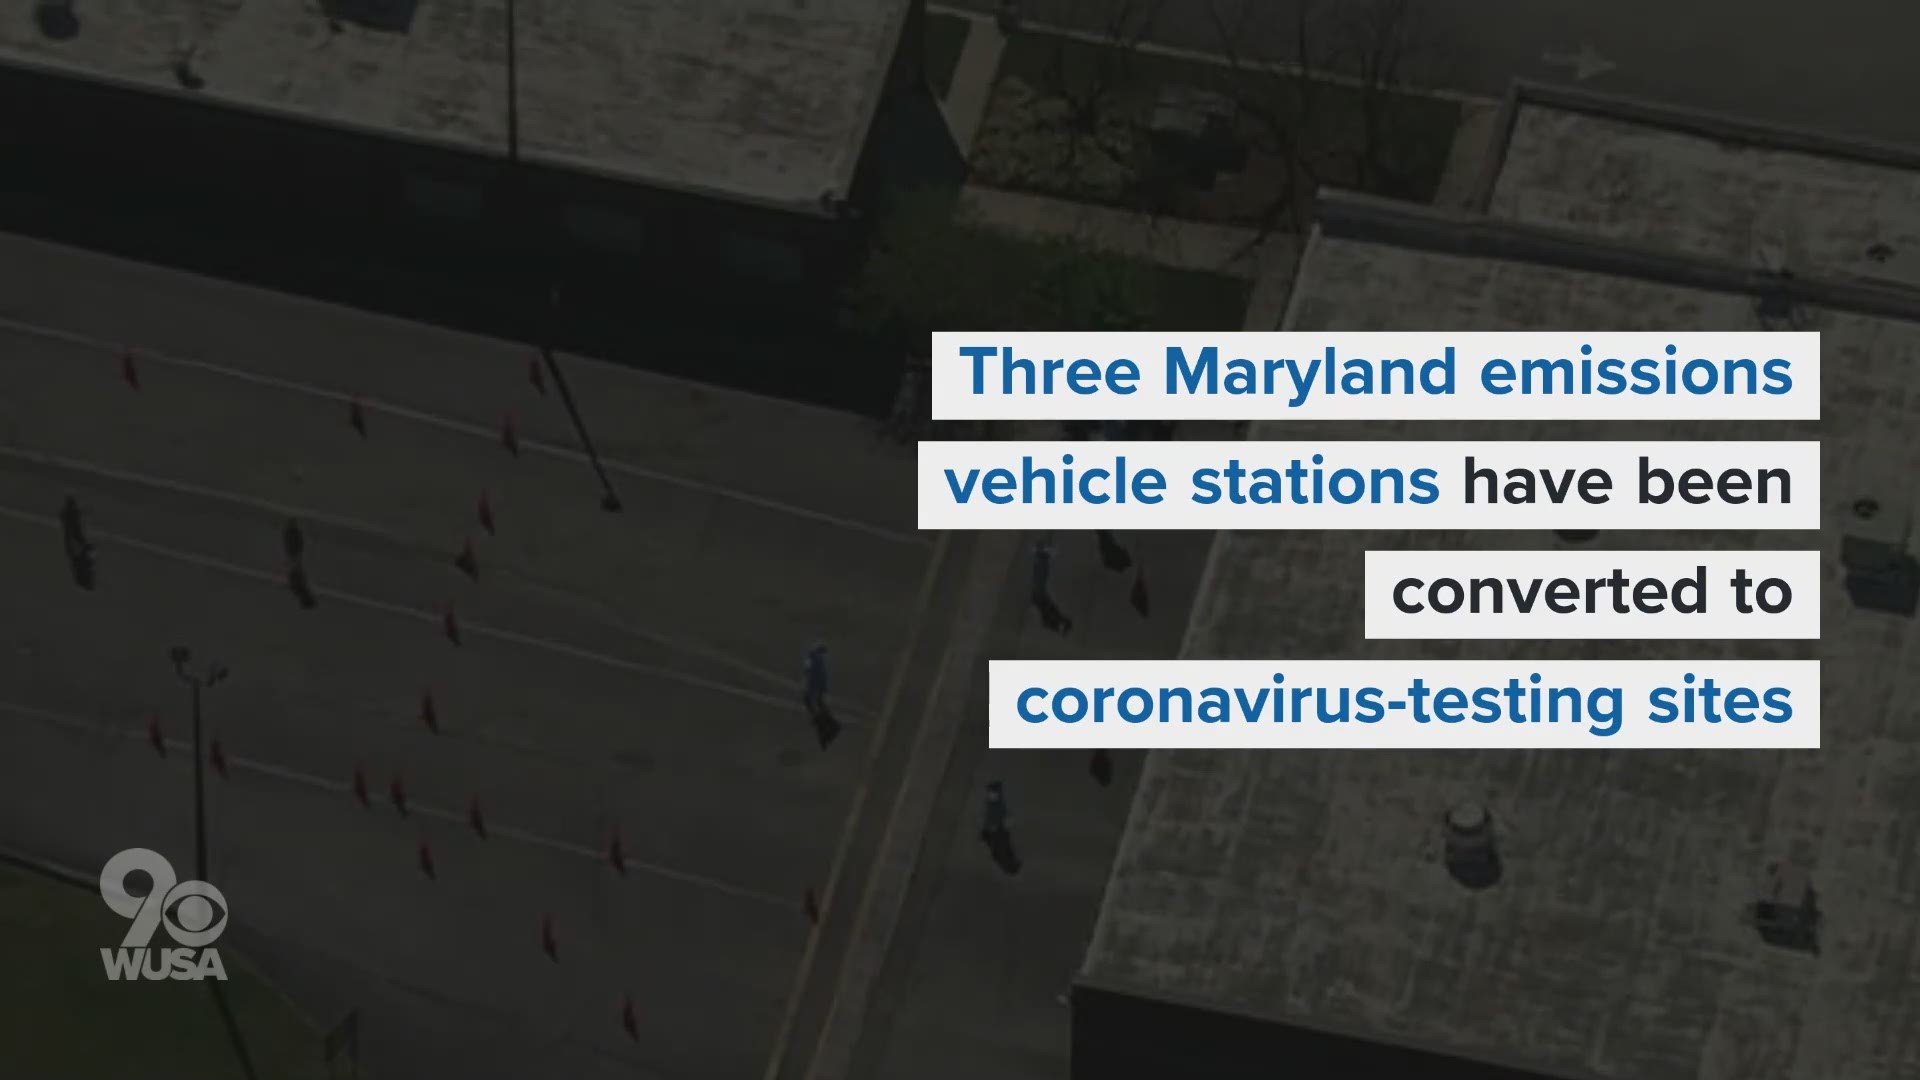 The test sites open on April 1, and are located at three emissions testing centers in Glen Bernie, Waldorf and Bel Air.